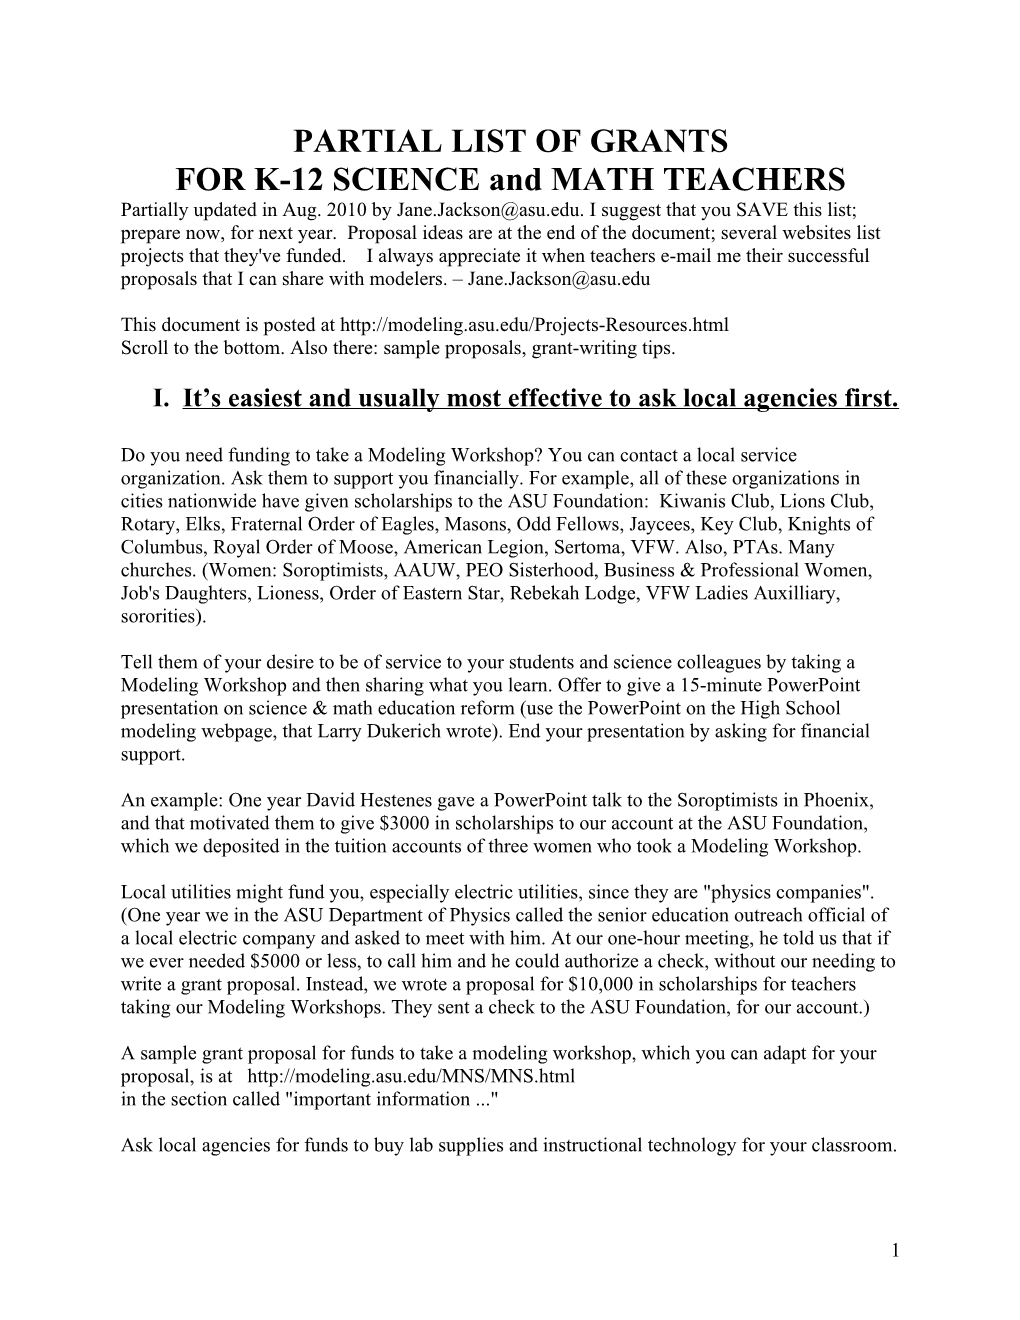 PARTIAL LIST of GRANTS for K-12 SCIENCE and MATH TEACHERS